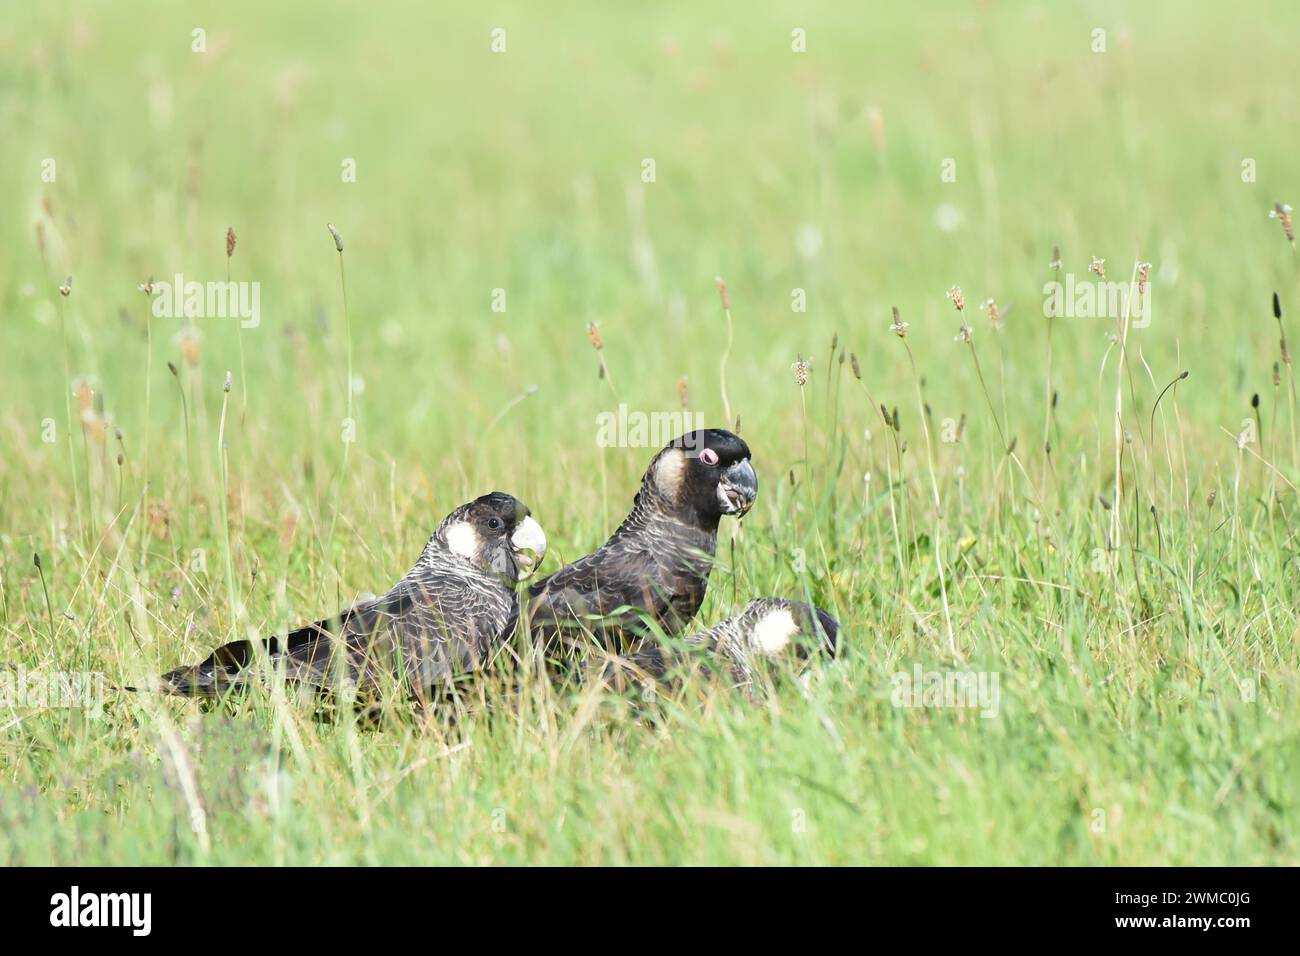 Male and female Carnaby's black cockatoo (Zanda latirostris) foraging together in a field Stock Photo